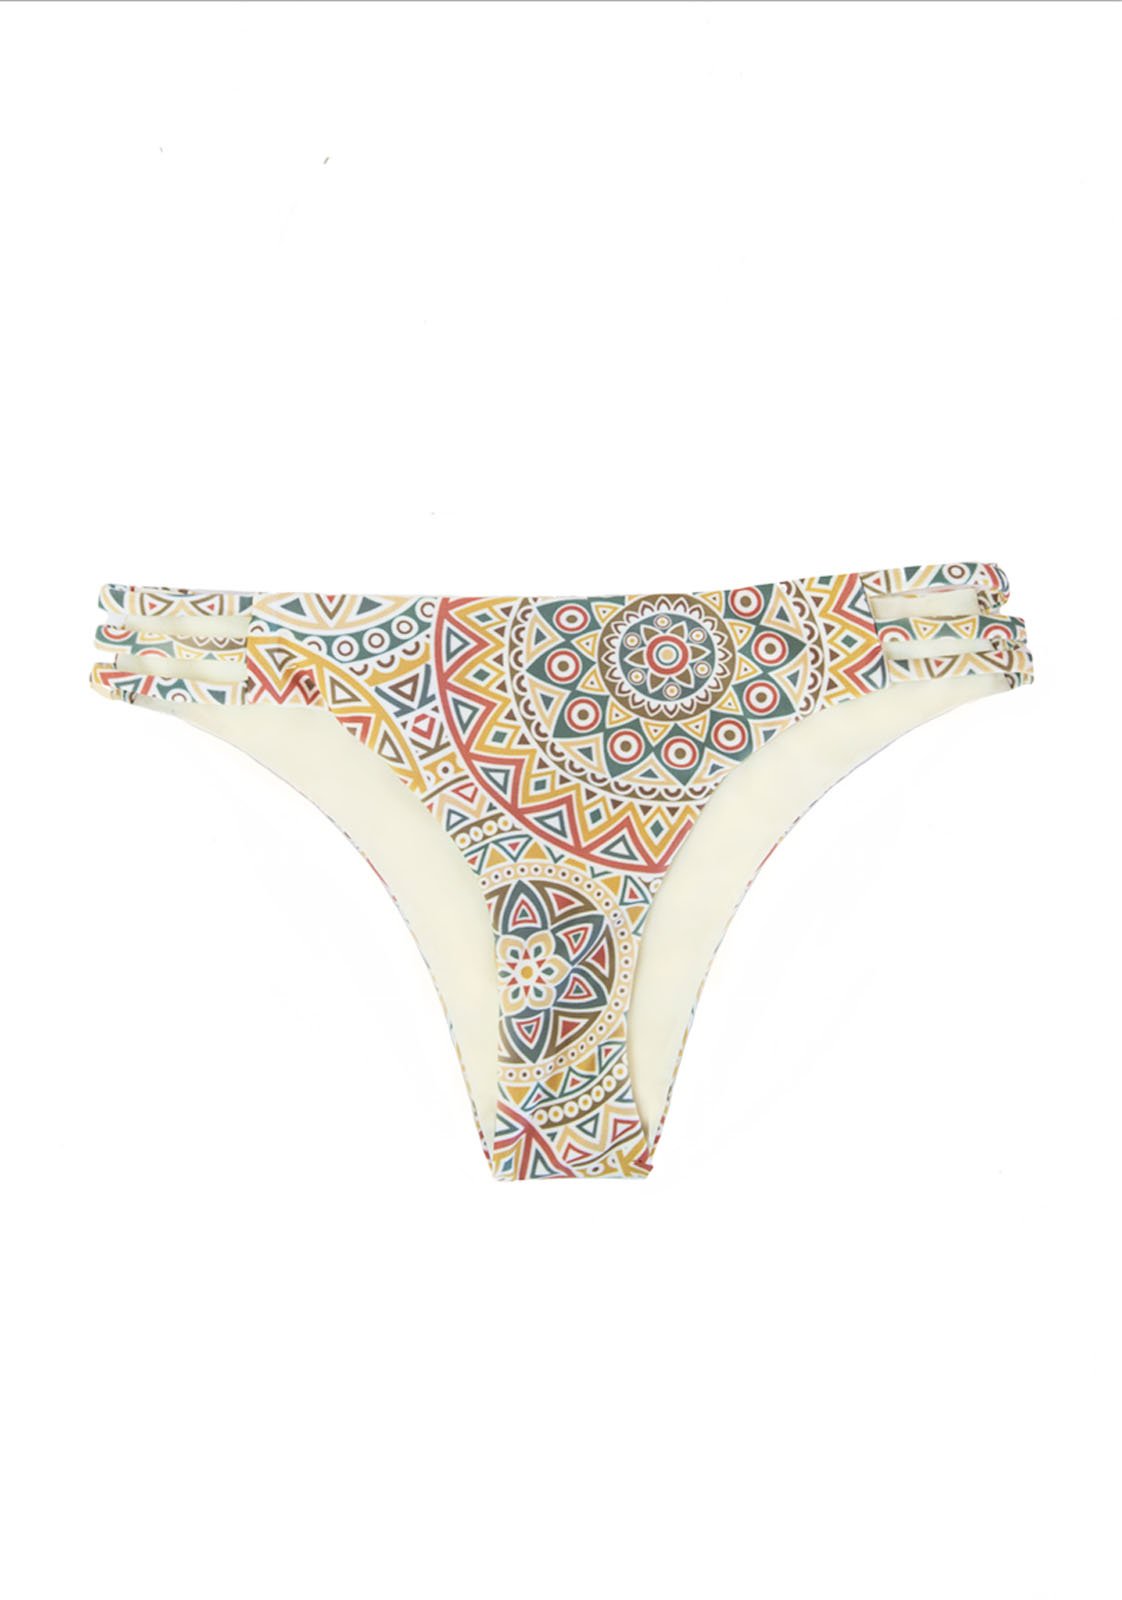 Boho Chic "Cheeky" Bikini Bottoms, reversible, high quality and sustainable, with ruched detail in the back.